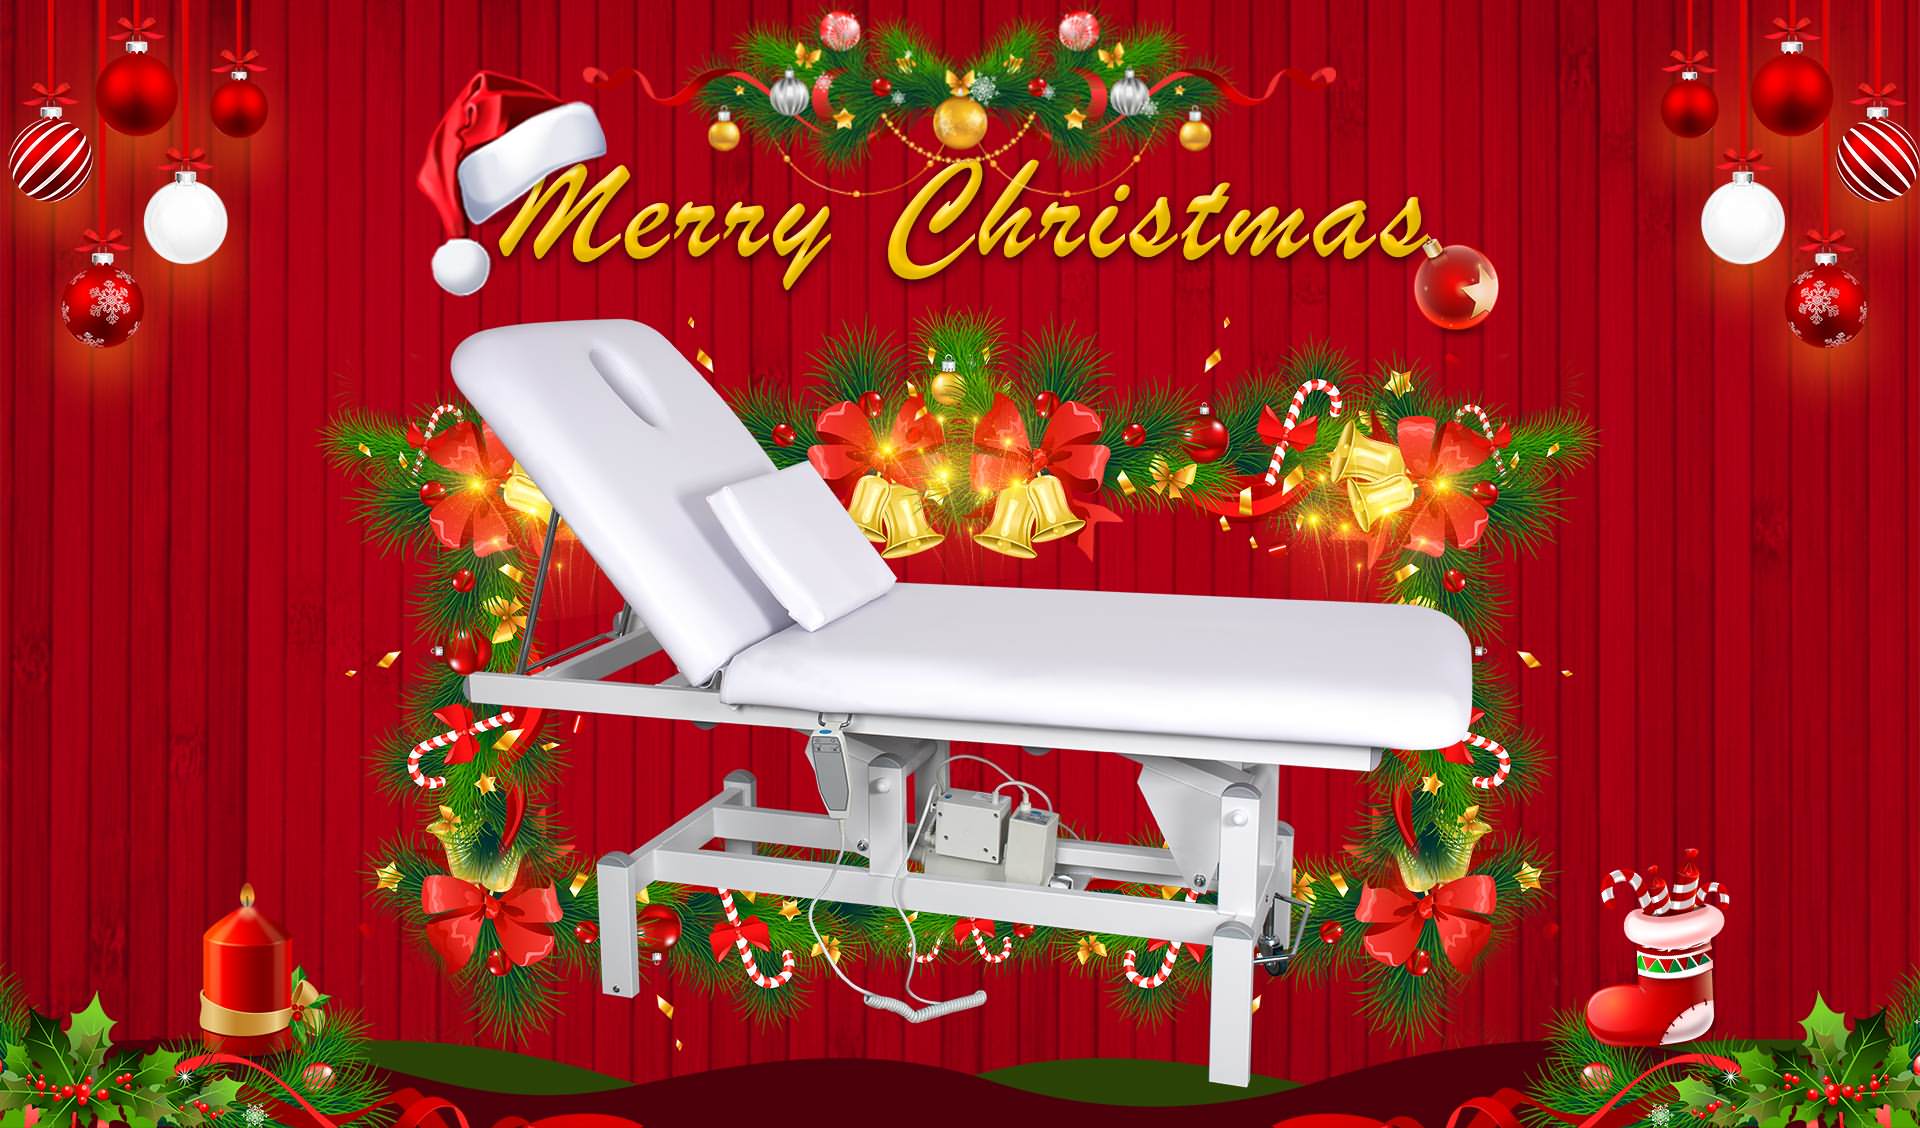 Hey, here's a Christmas gift for your from treatment table factory--DongPin